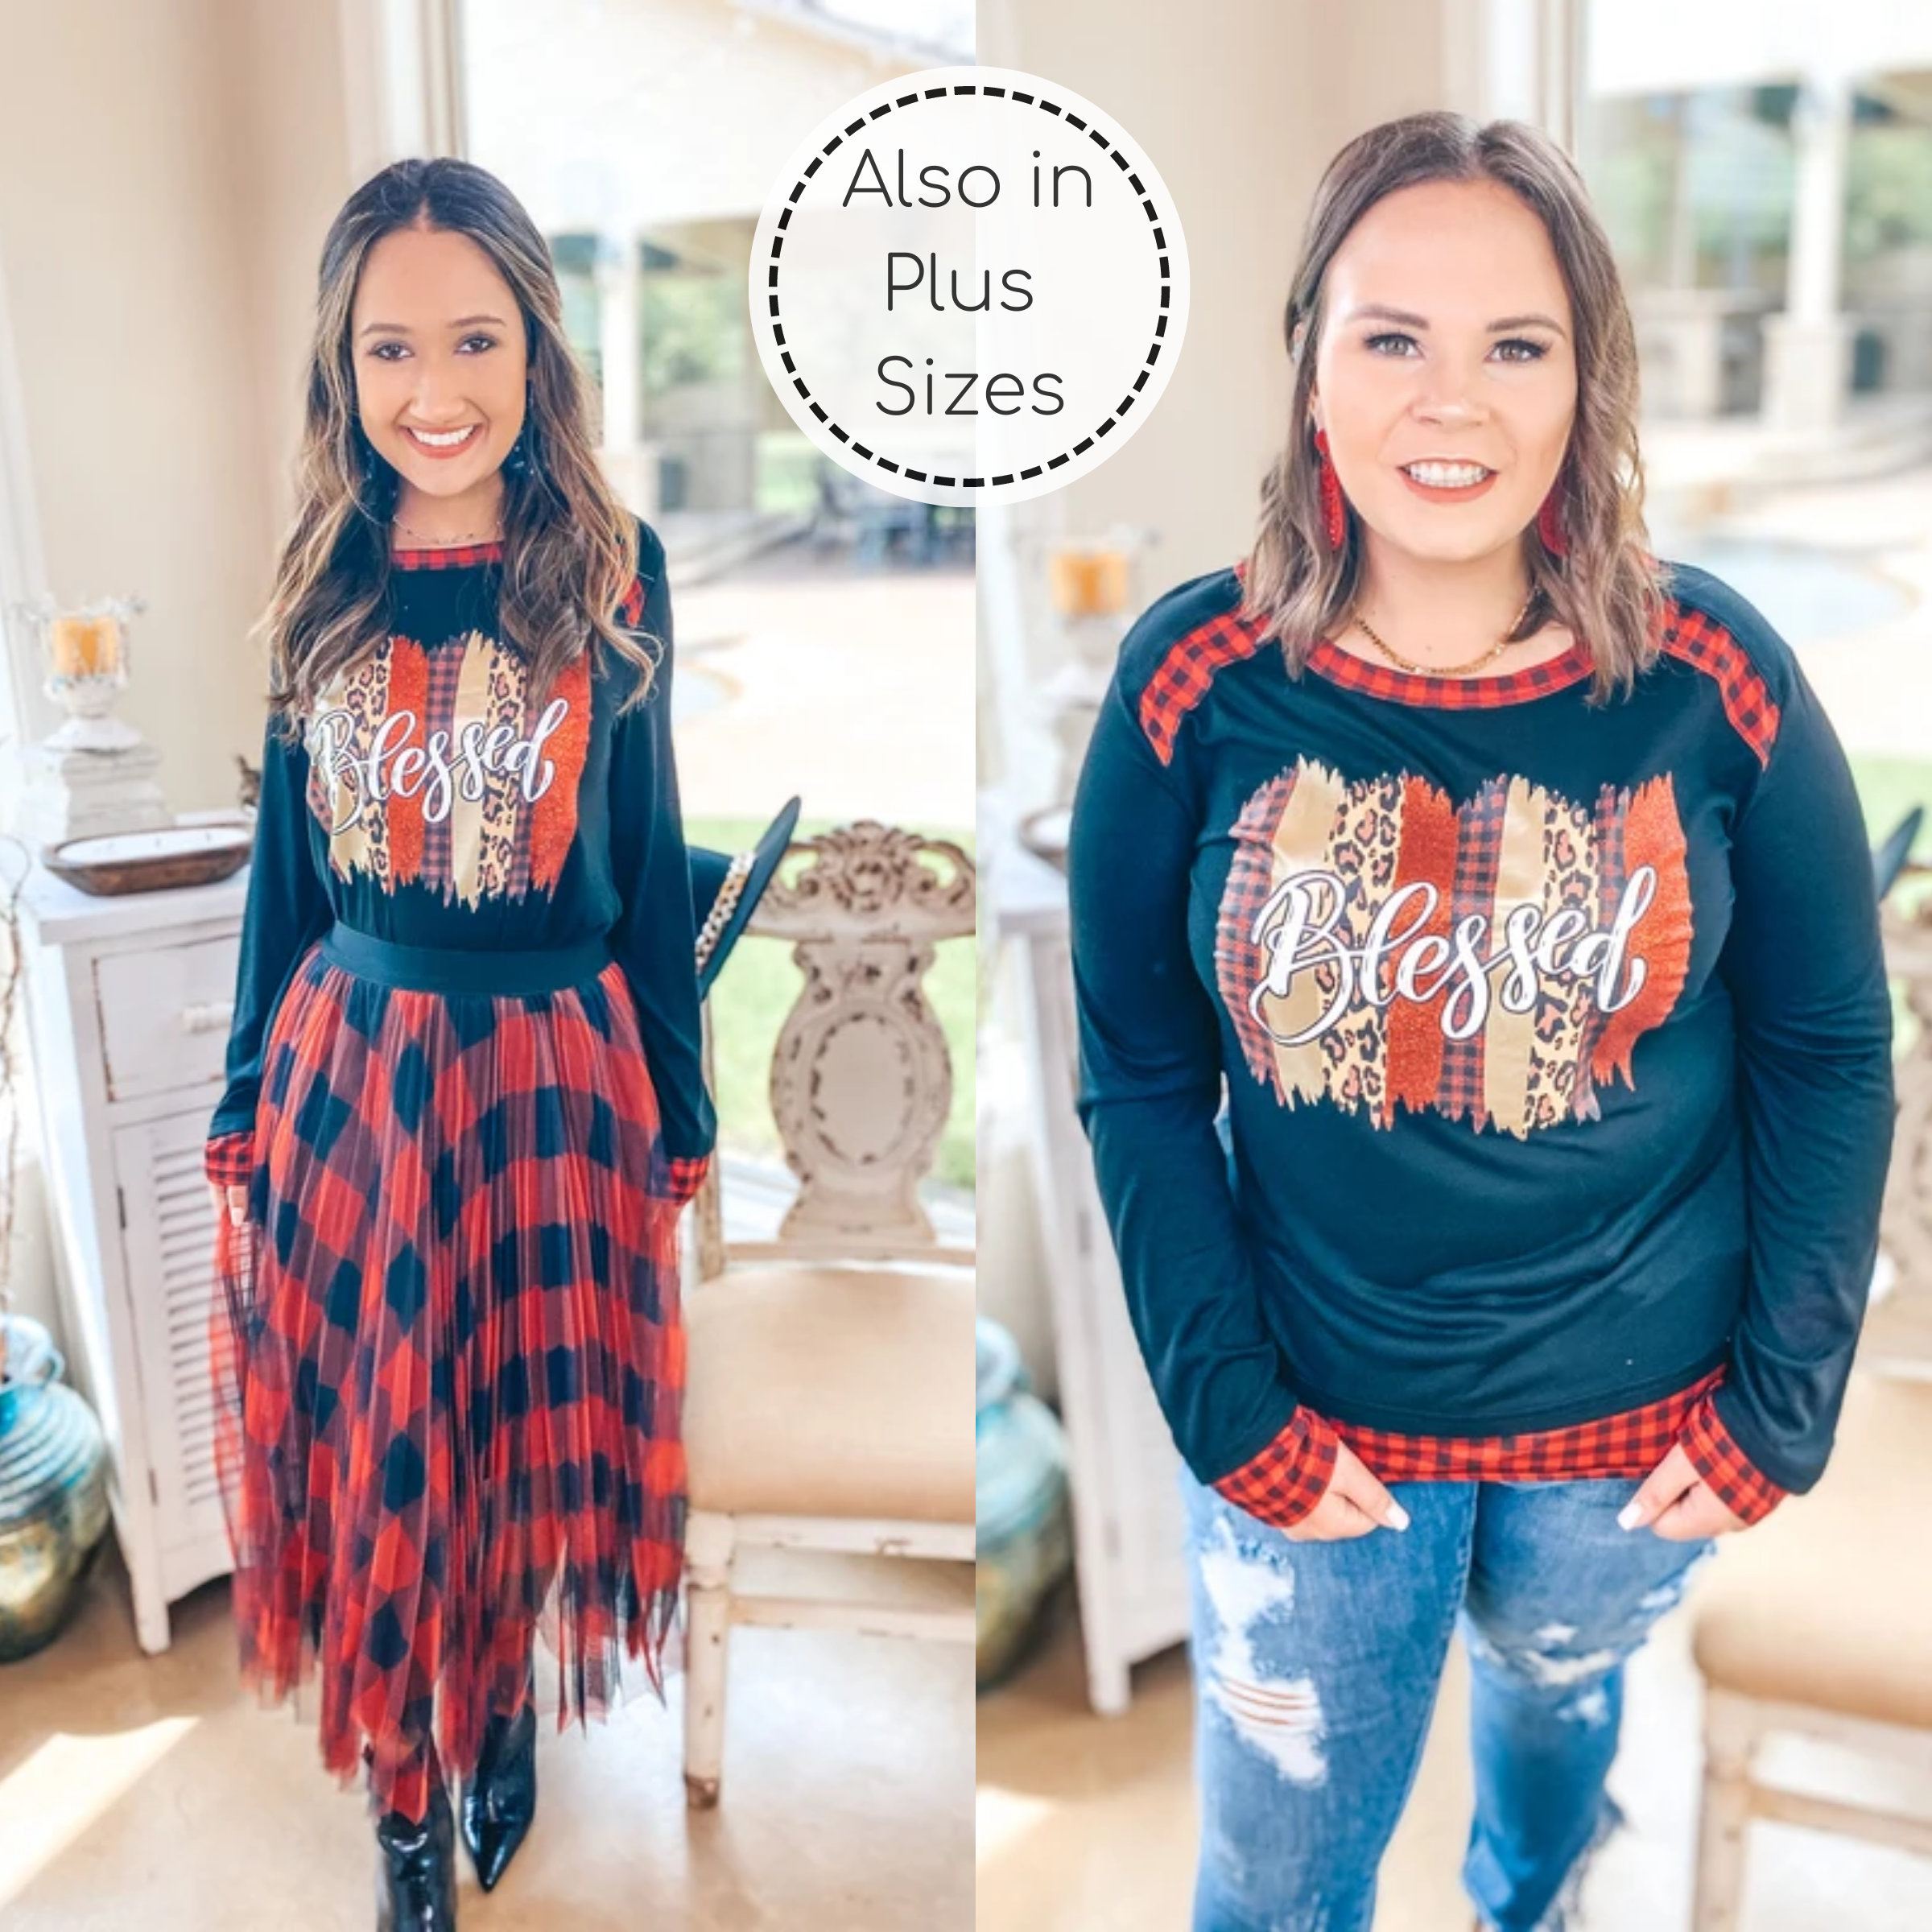 Blessed Mixed Pattern Graphic Tee with Buffalo Plaid Trim in Black - Giddy Up Glamour Boutique